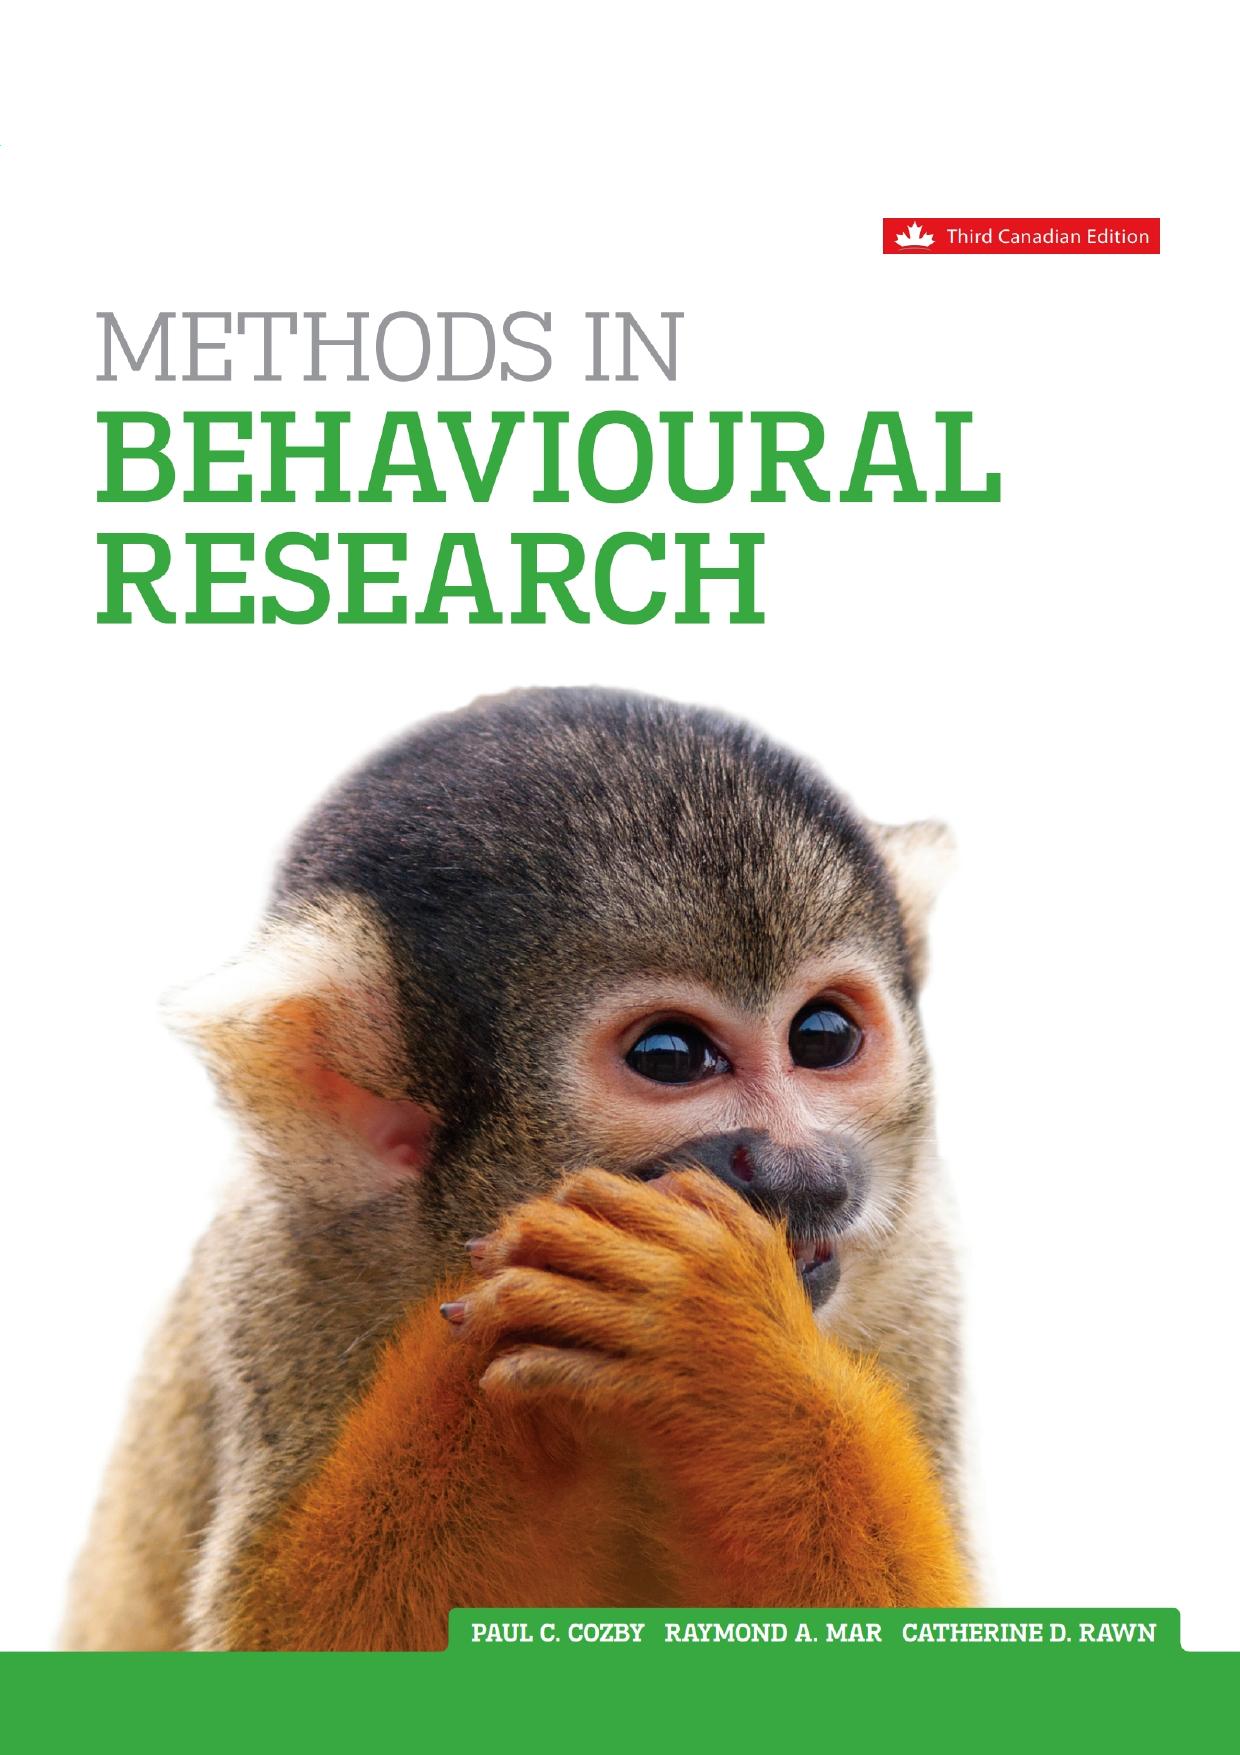 (Test Bank)Methods In Behavioural Research 3rd Edition by Paul C. Cozby